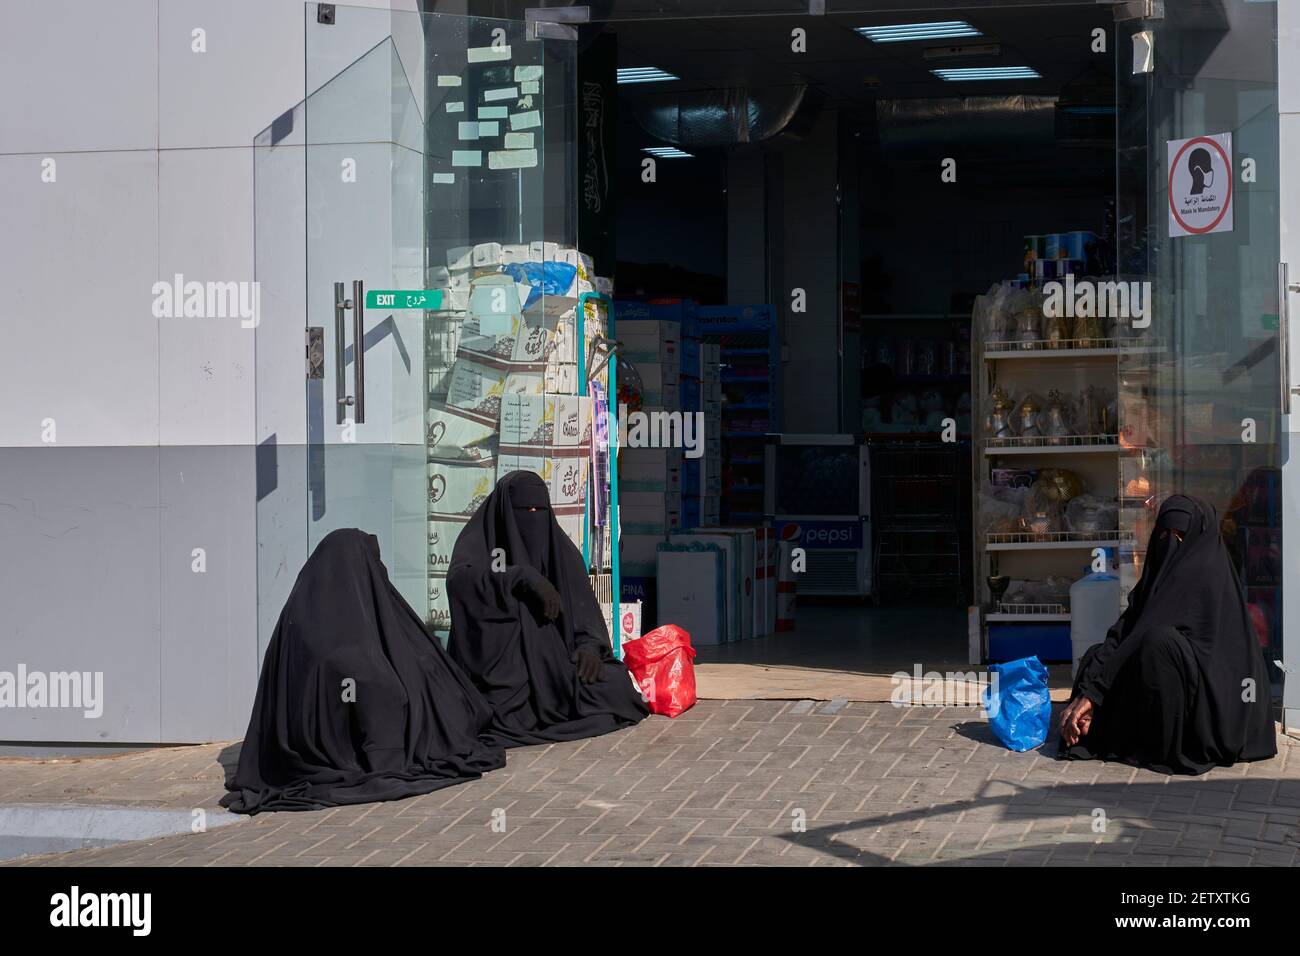 Arab women begging in a food store Stock Photo